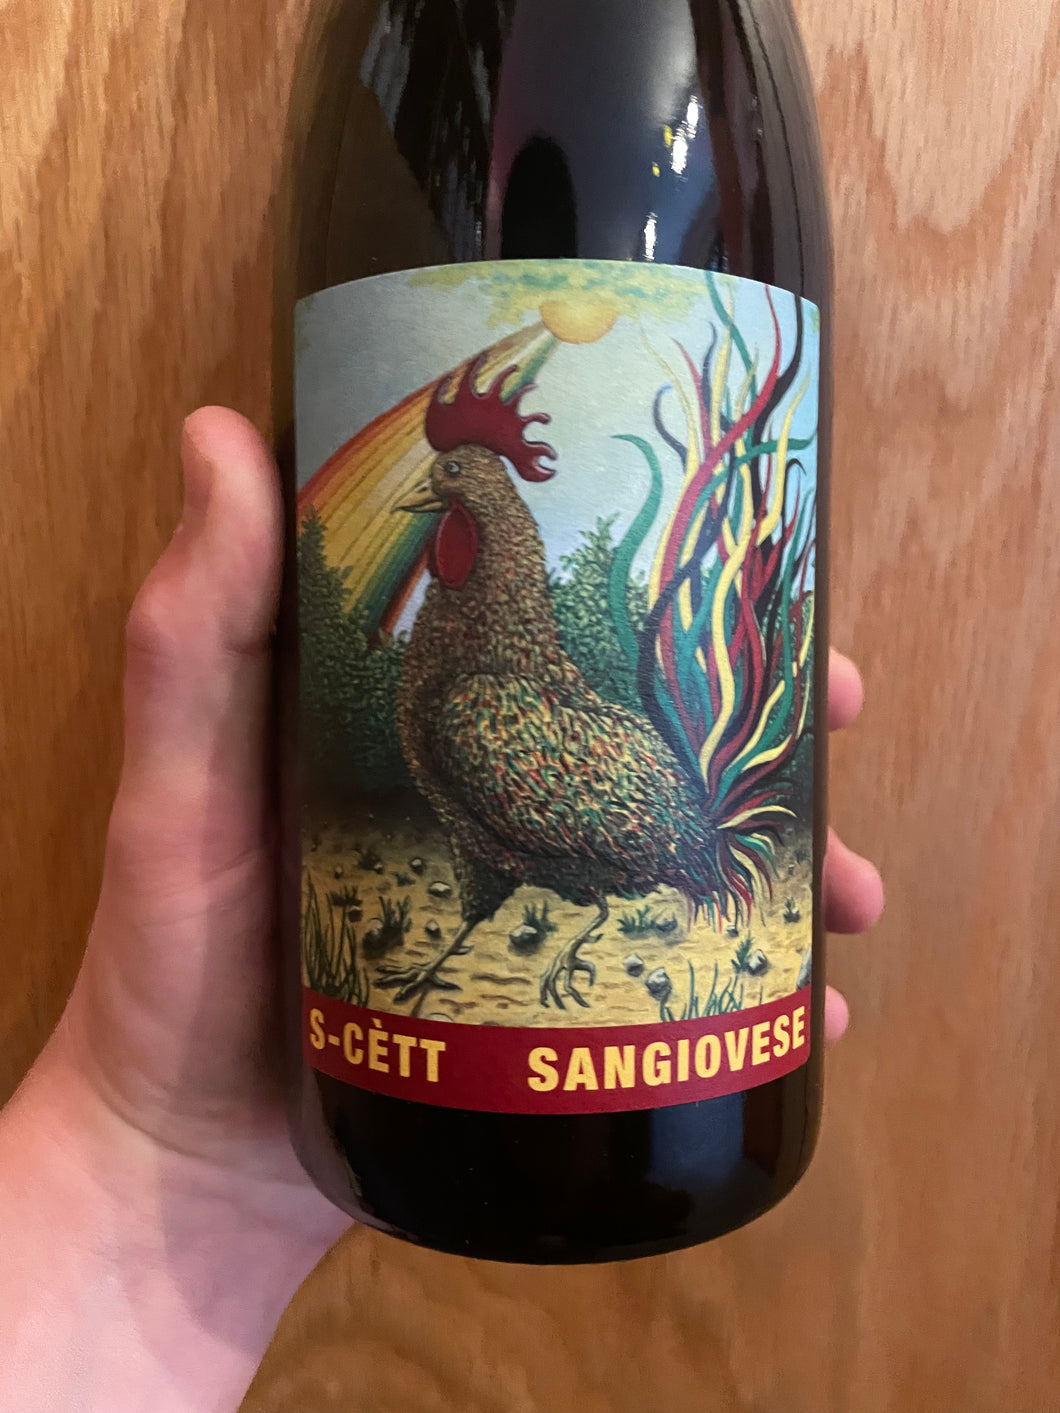 S-Cett Sangiovese Rubicone IGP Red